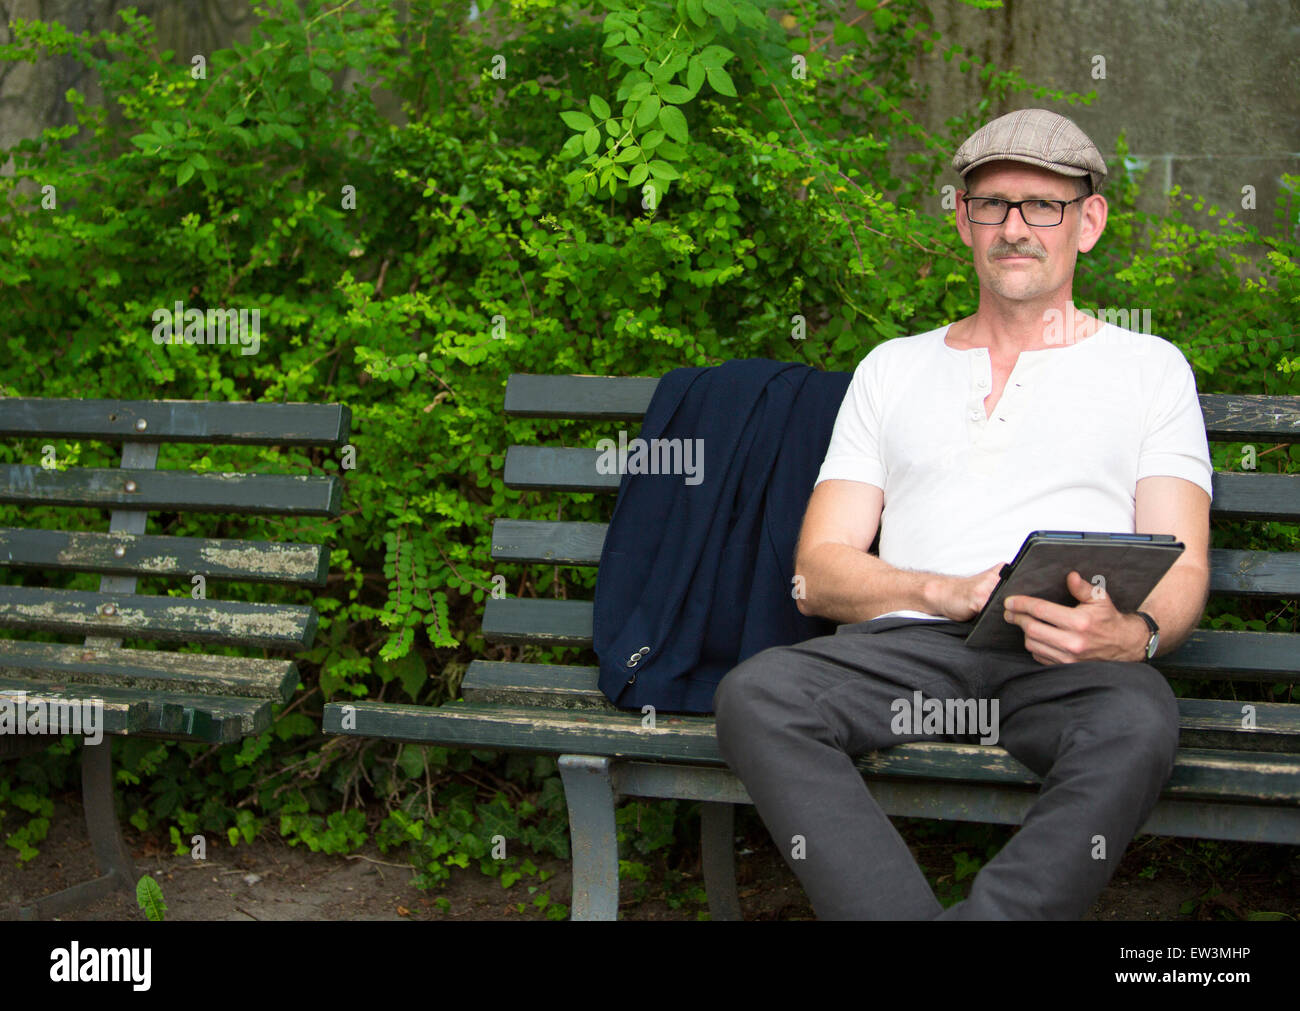 man sitting on a bench in a park with tablet in his hand Stock Photo